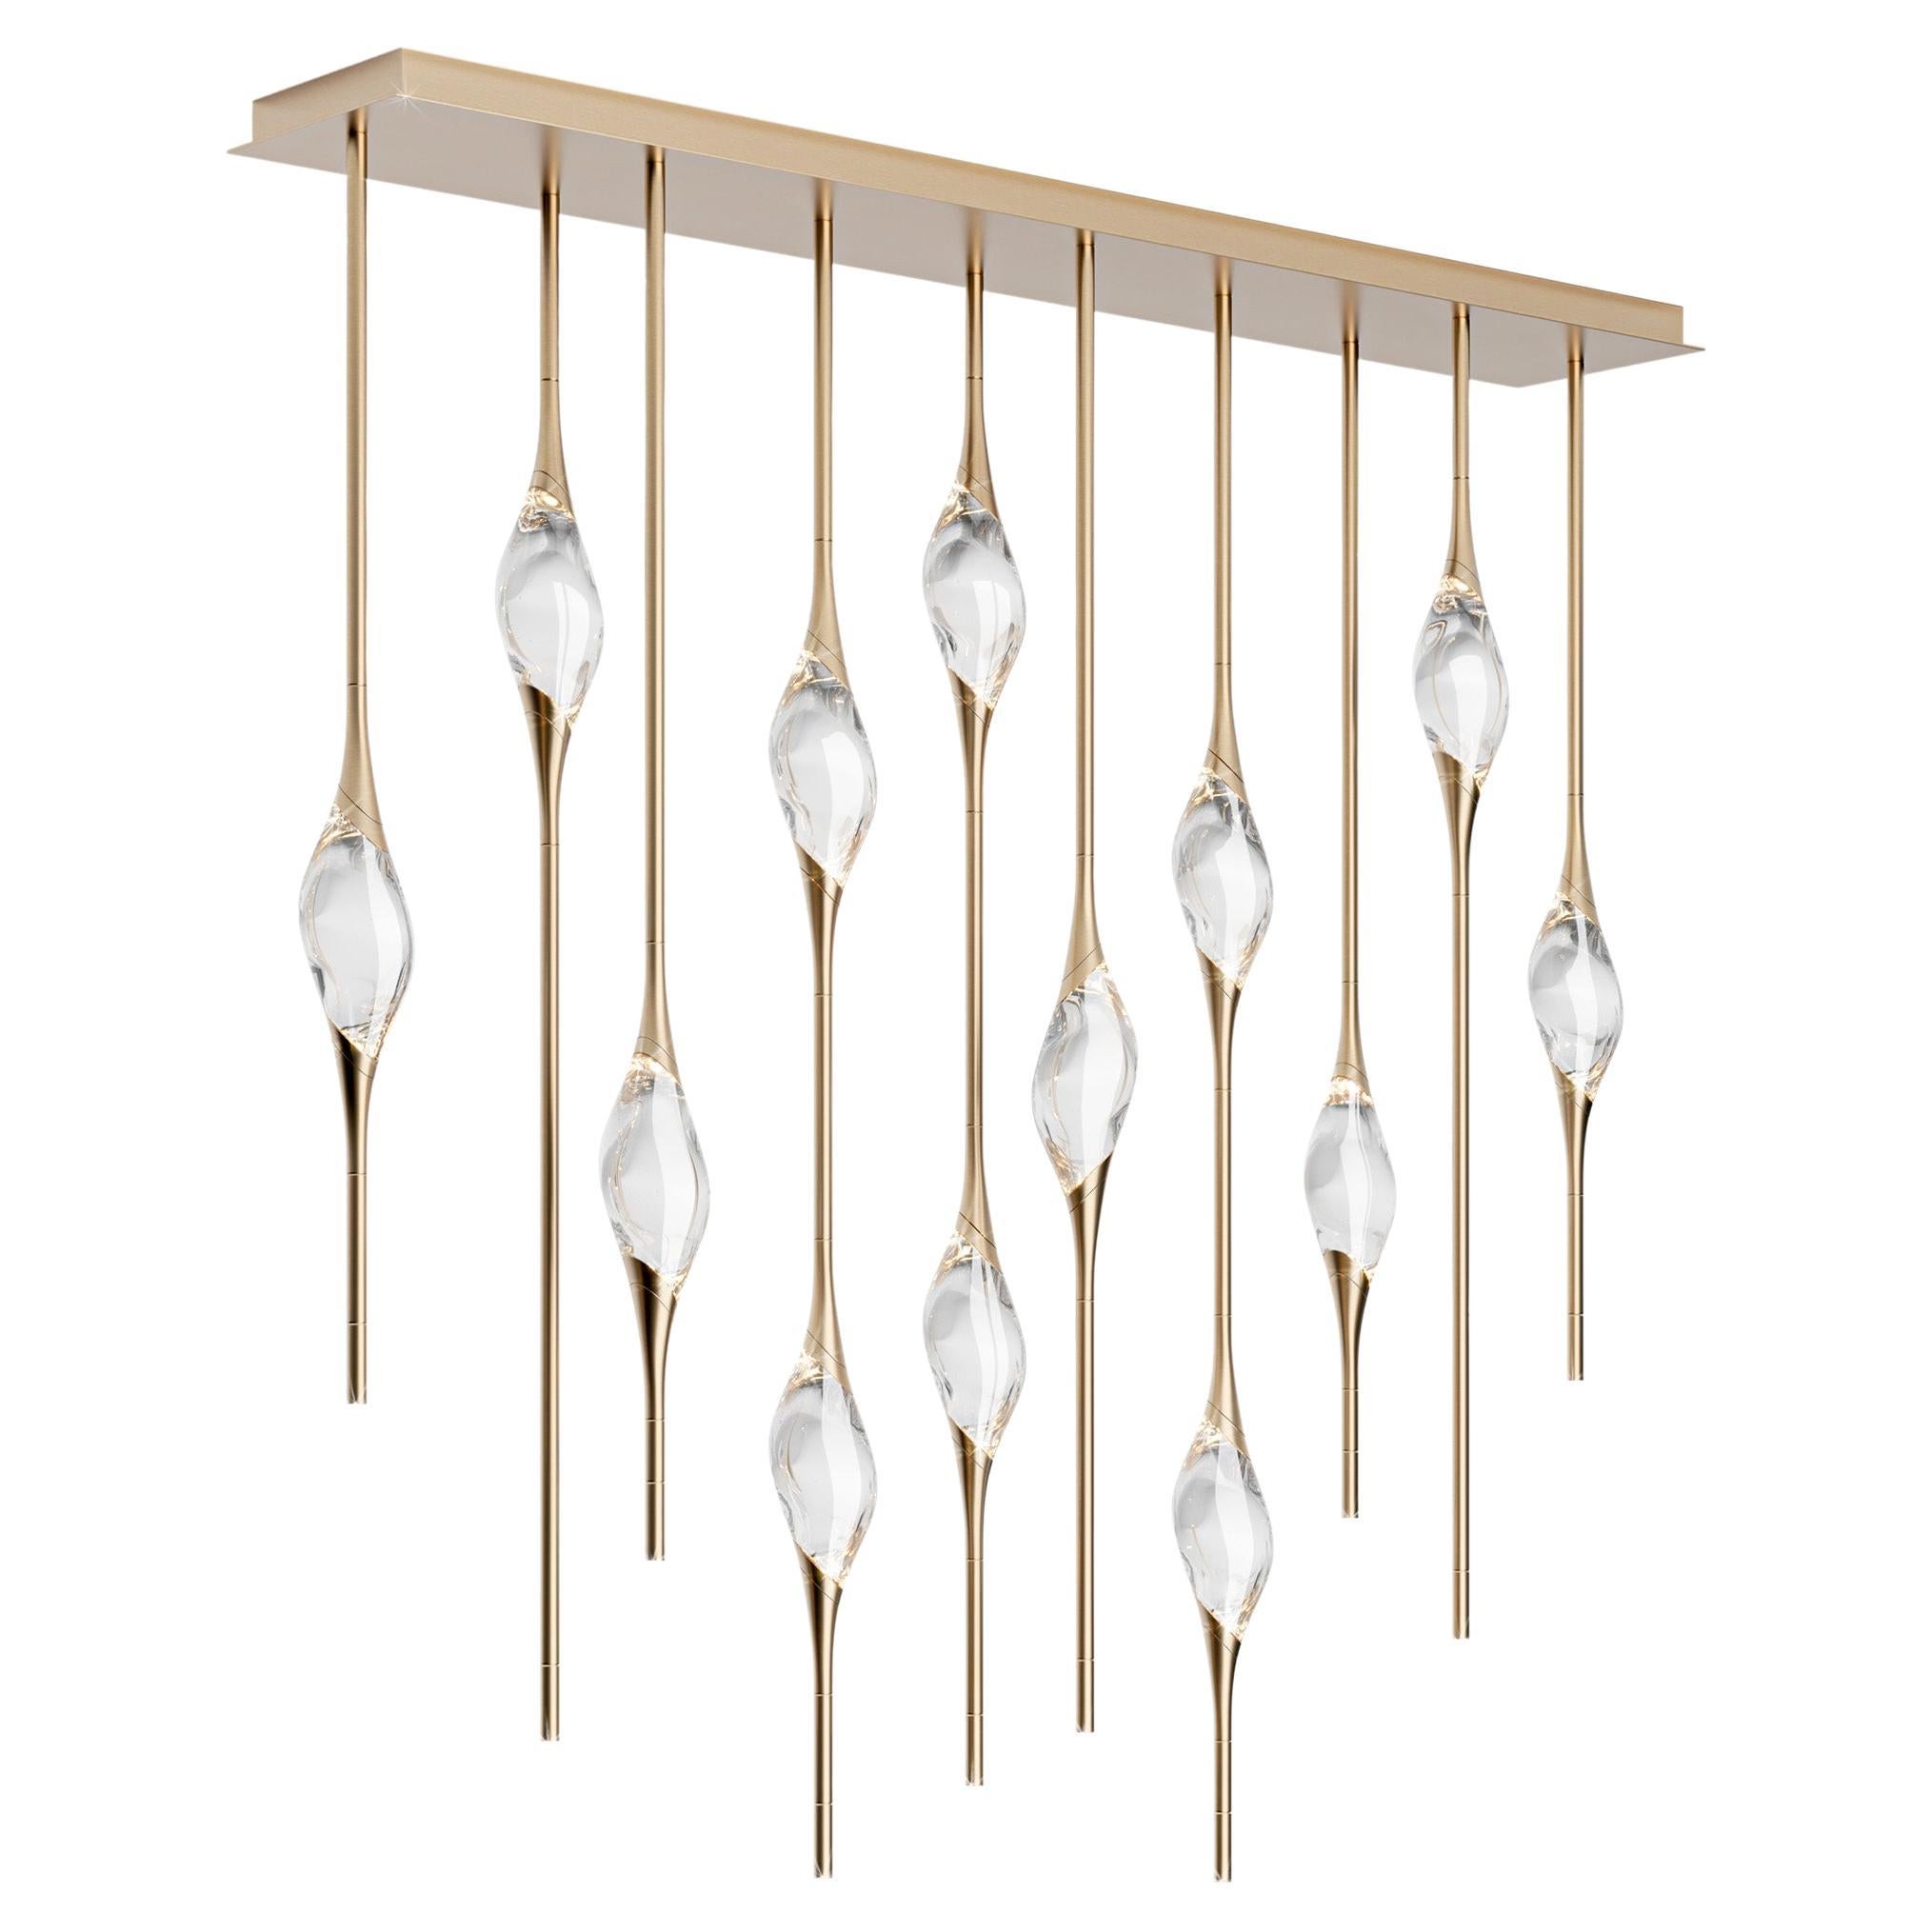 "Il Pezzo 12 Staggered Chandelier" - length 150cm/59” - satin brass - crystal For Sale